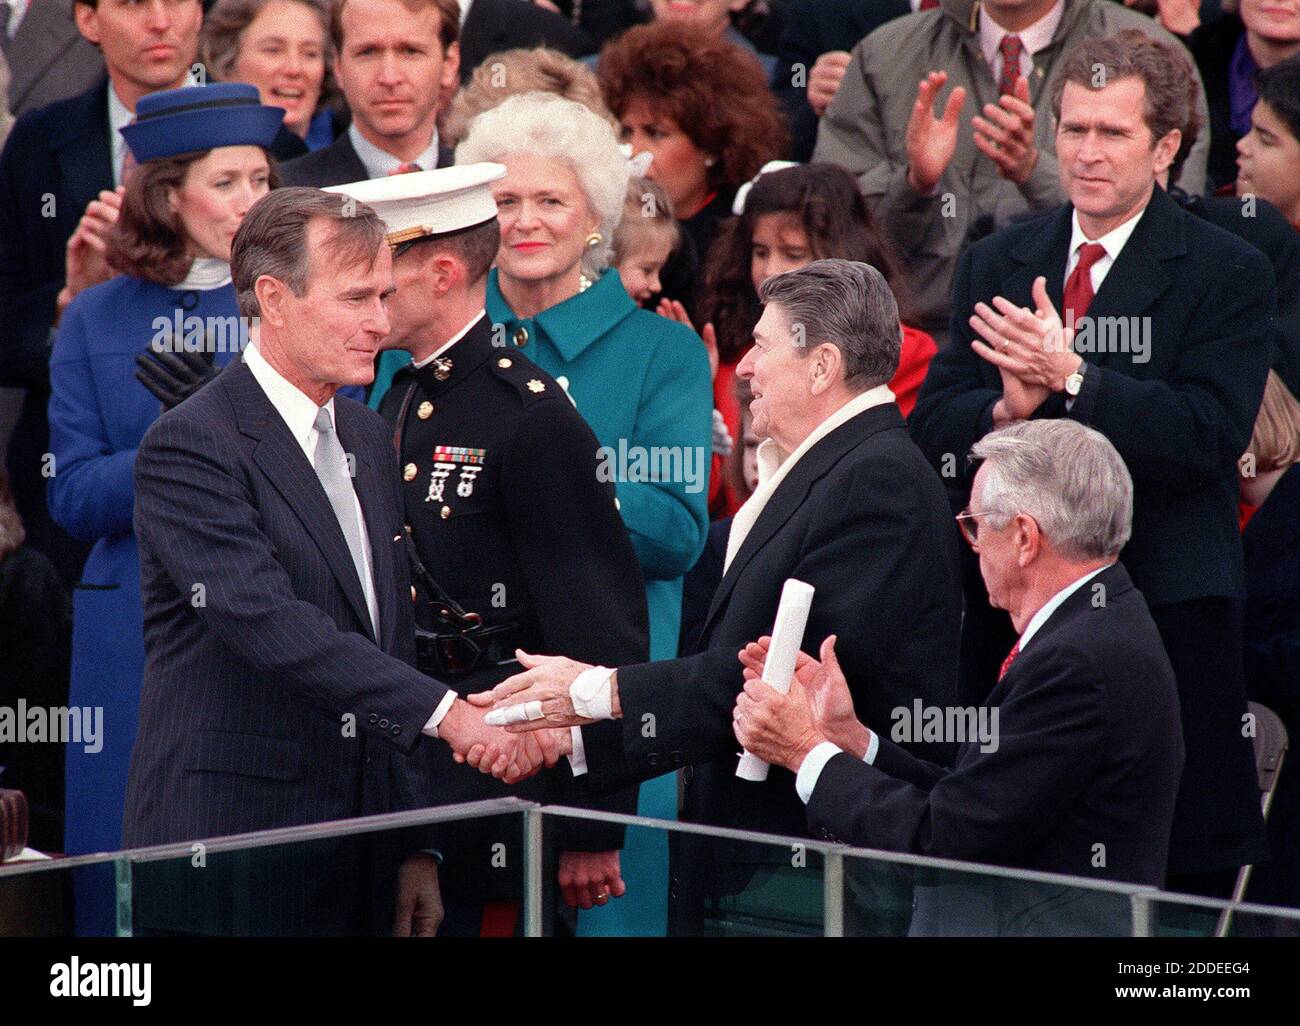 NO FILM, NO VIDEO, NO TV, NO DOCUMENTARY - Newly-inaugurated president George H.W. Bush. shakes hands with Ronald Reagan as George W. Bush (far right), First Lady Barbara Bush (center) and Marilyn Quayle (far left) applaud during Bush's swearing-in ceremony, Jan. 20, 1989, in Washington, D.C. George H.W. Bush died Friday, Nov. 30, 2018, at the age of 94. Photo by Joe Burbank/Orlando Sentinel/TNS/ABACAPRESS.COM Stock Photo